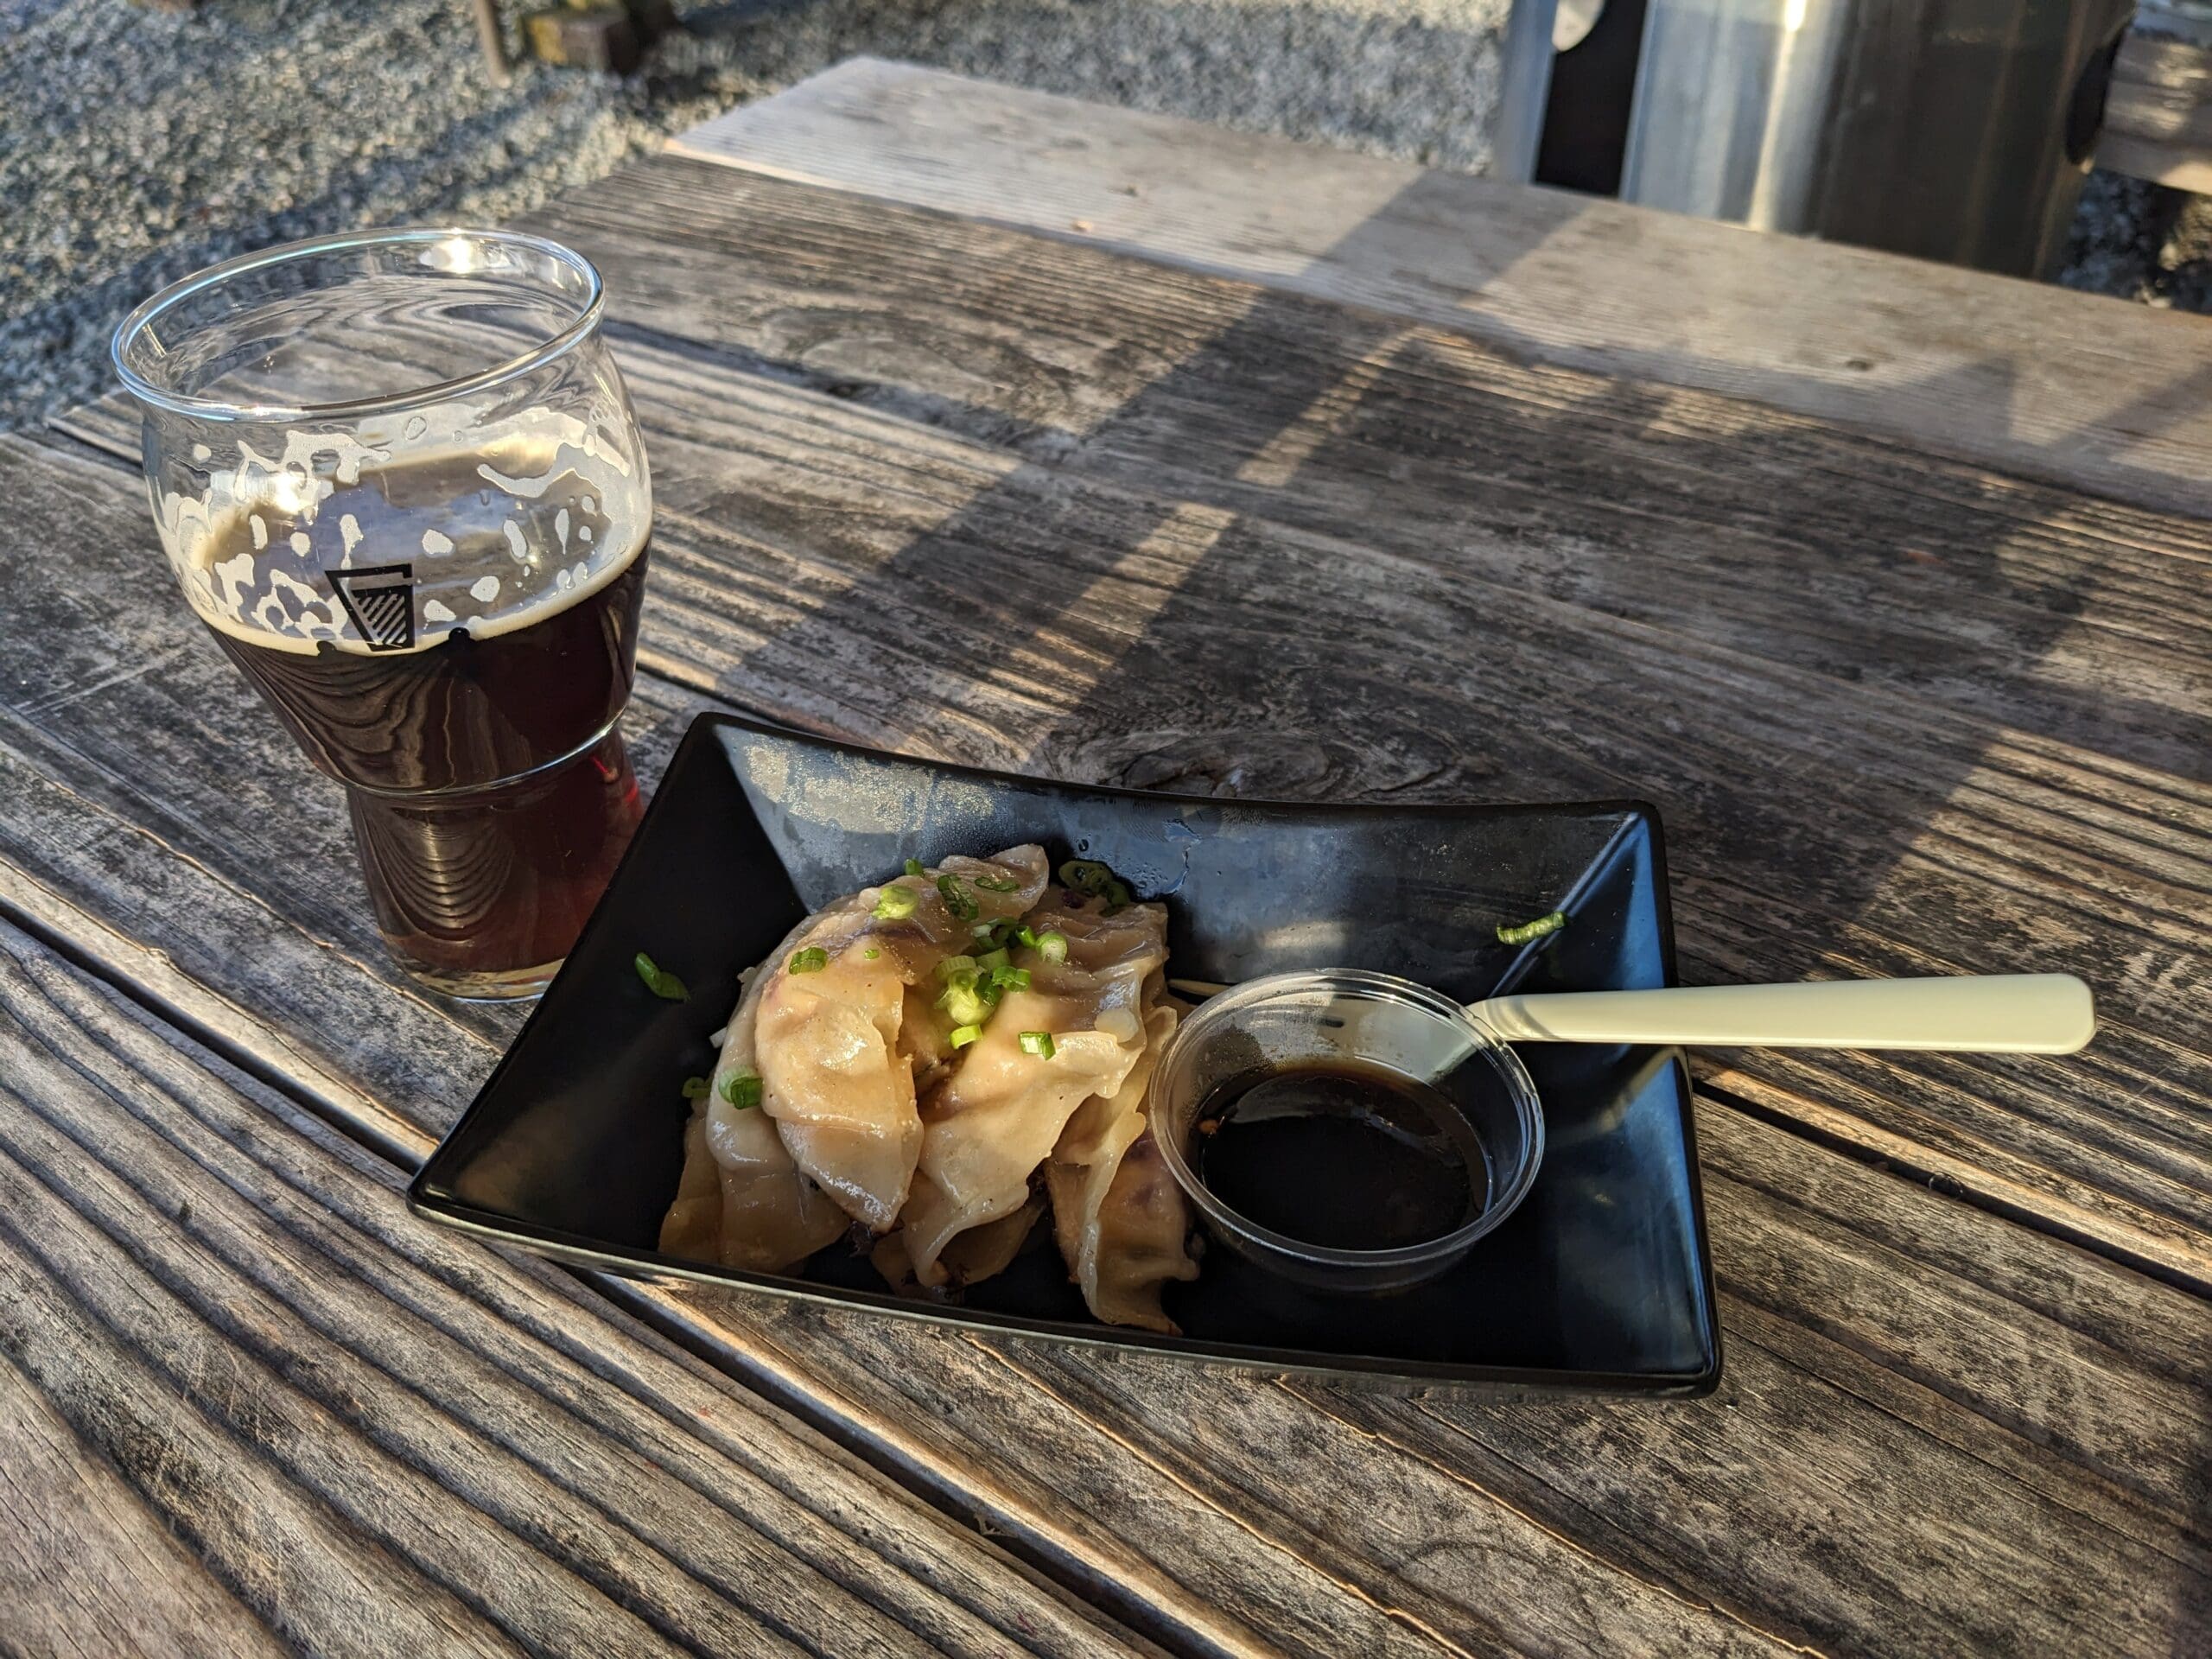 House-made tofu gyoza with a side of sauce and chopsticks, and a dark ale placed on a wooden table.